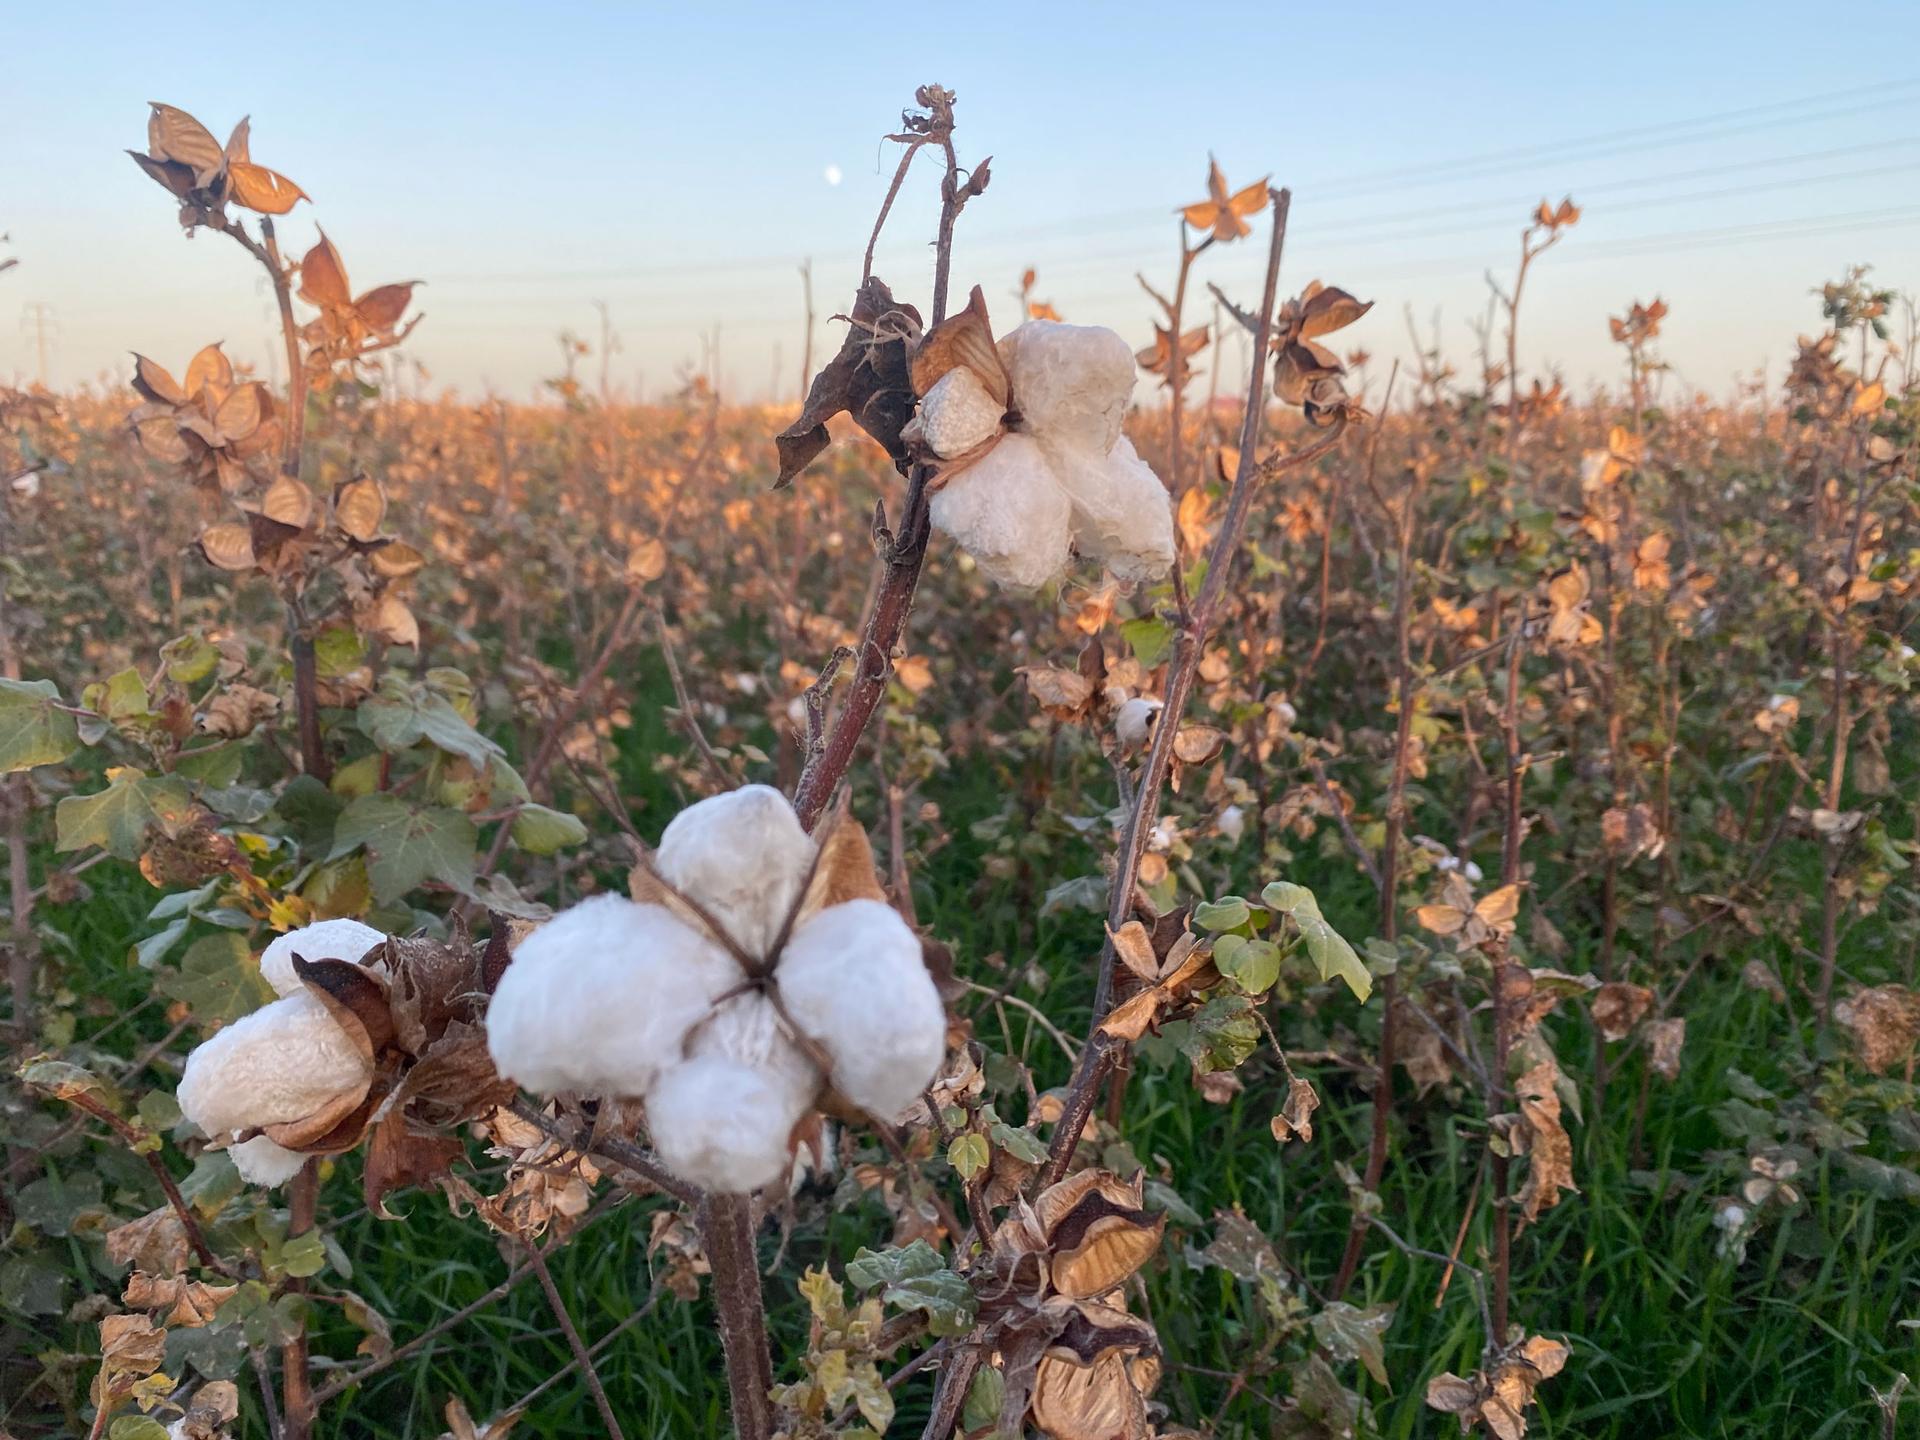 When Uzbekistan was part of the Soviet Union authorities diverted much of the country's water resources to cotton production, eventually making Uzbekistan one of the world's largest cotton producers.